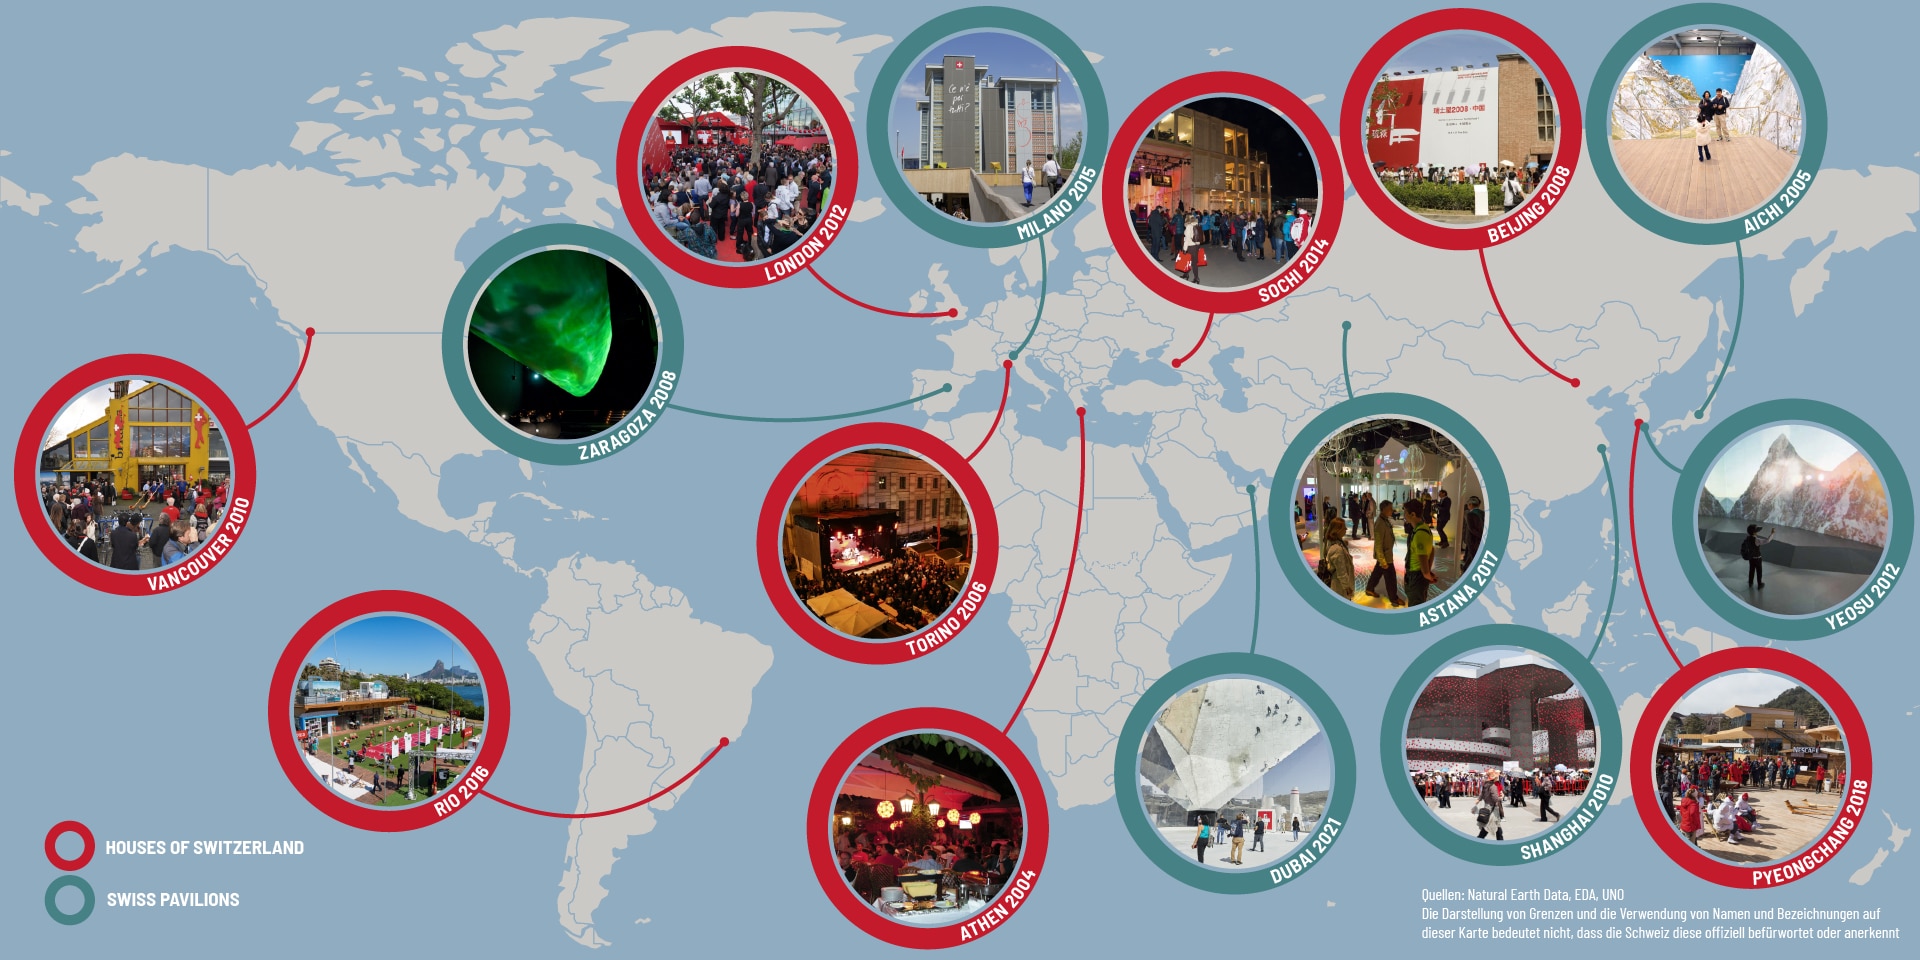 Graphic representation of a world map with various small pictures of Swiss pavilions and the "House of Switzerland" at major international events. 